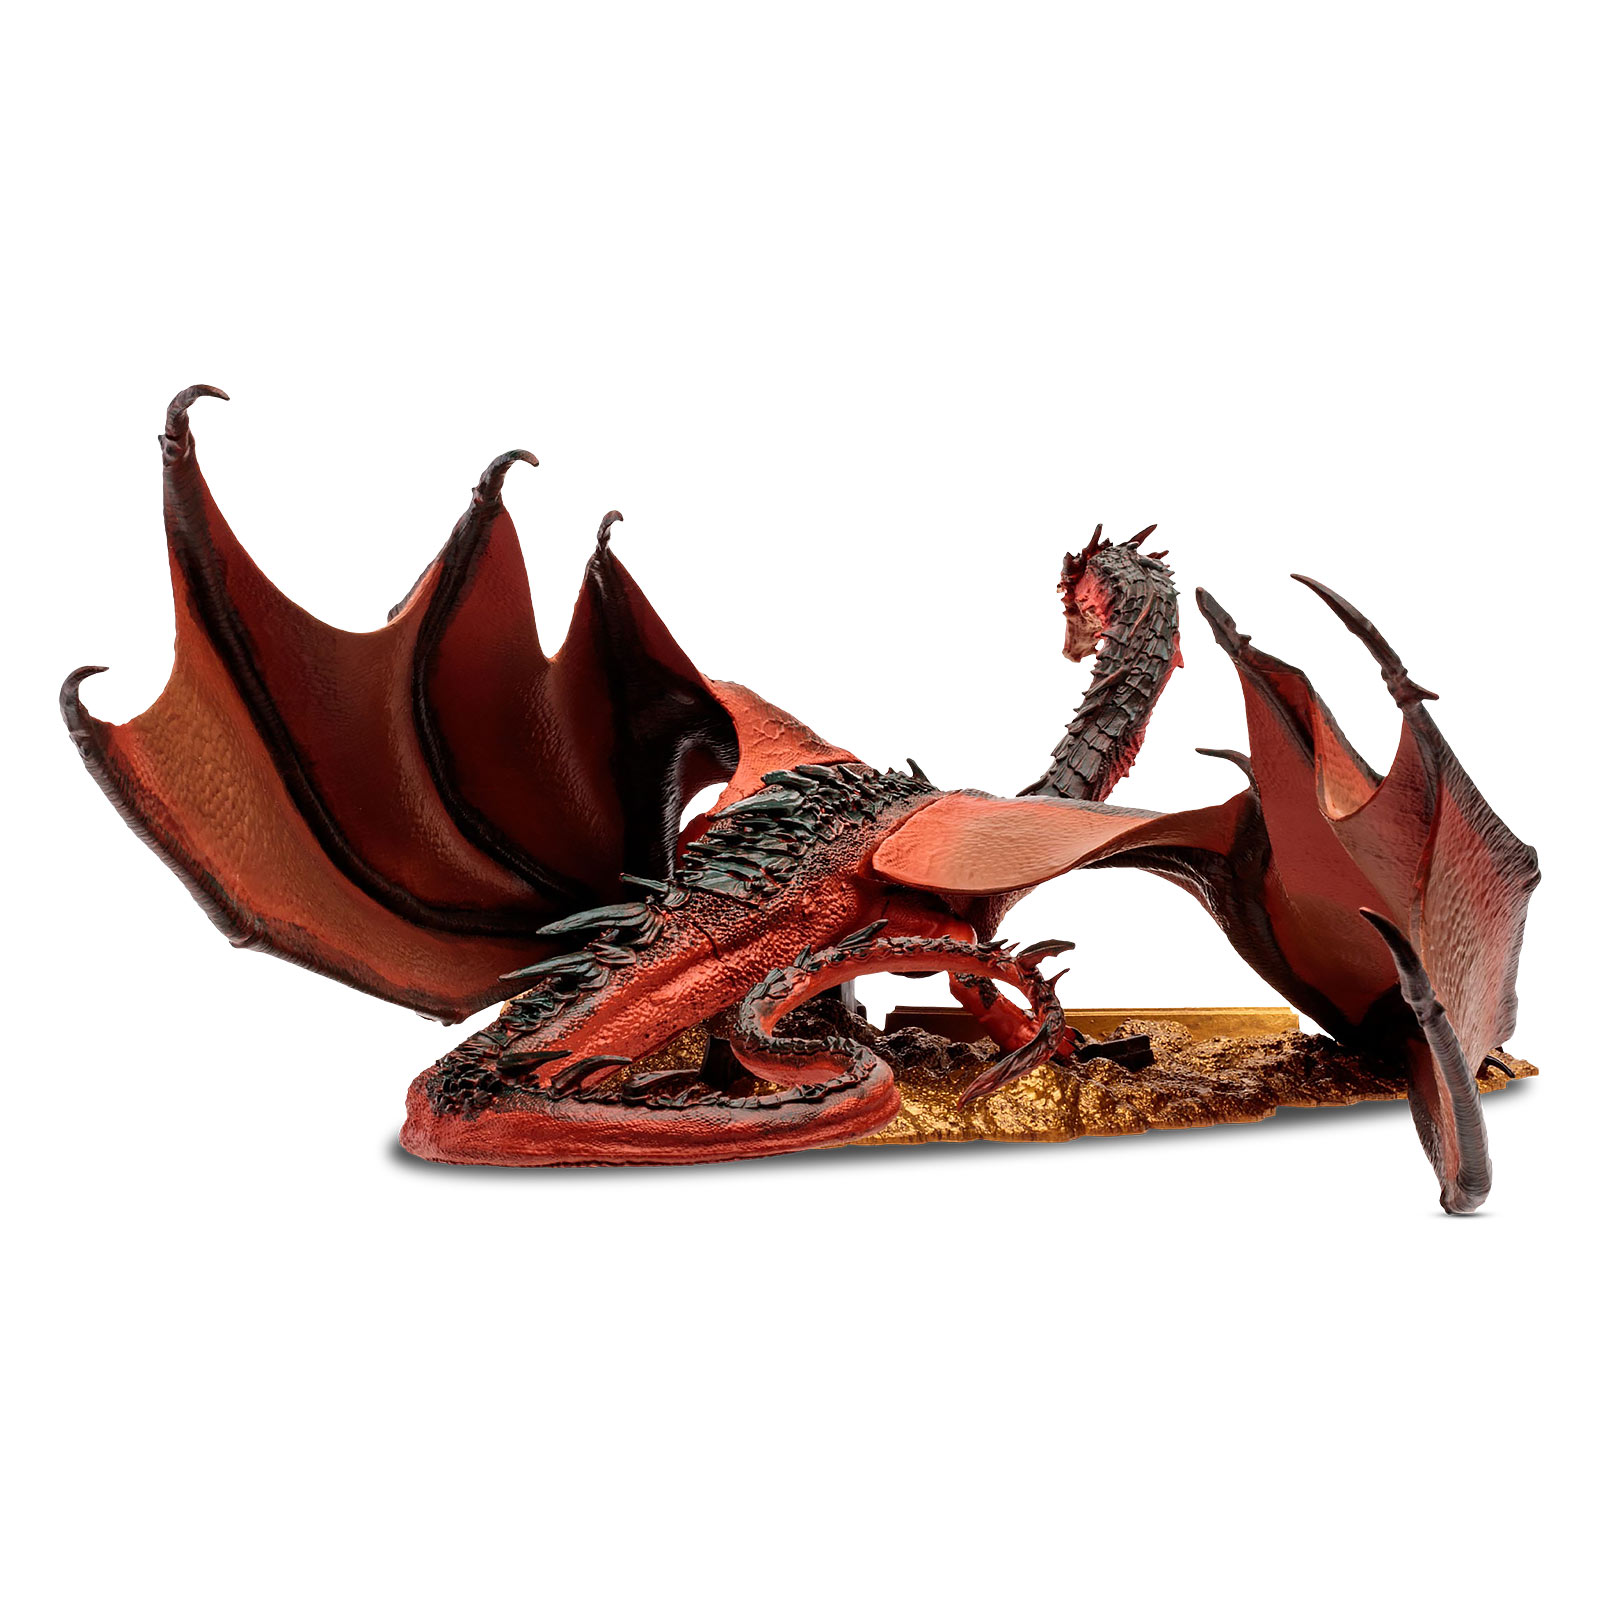 Lord of the Rings - Smaug Figure